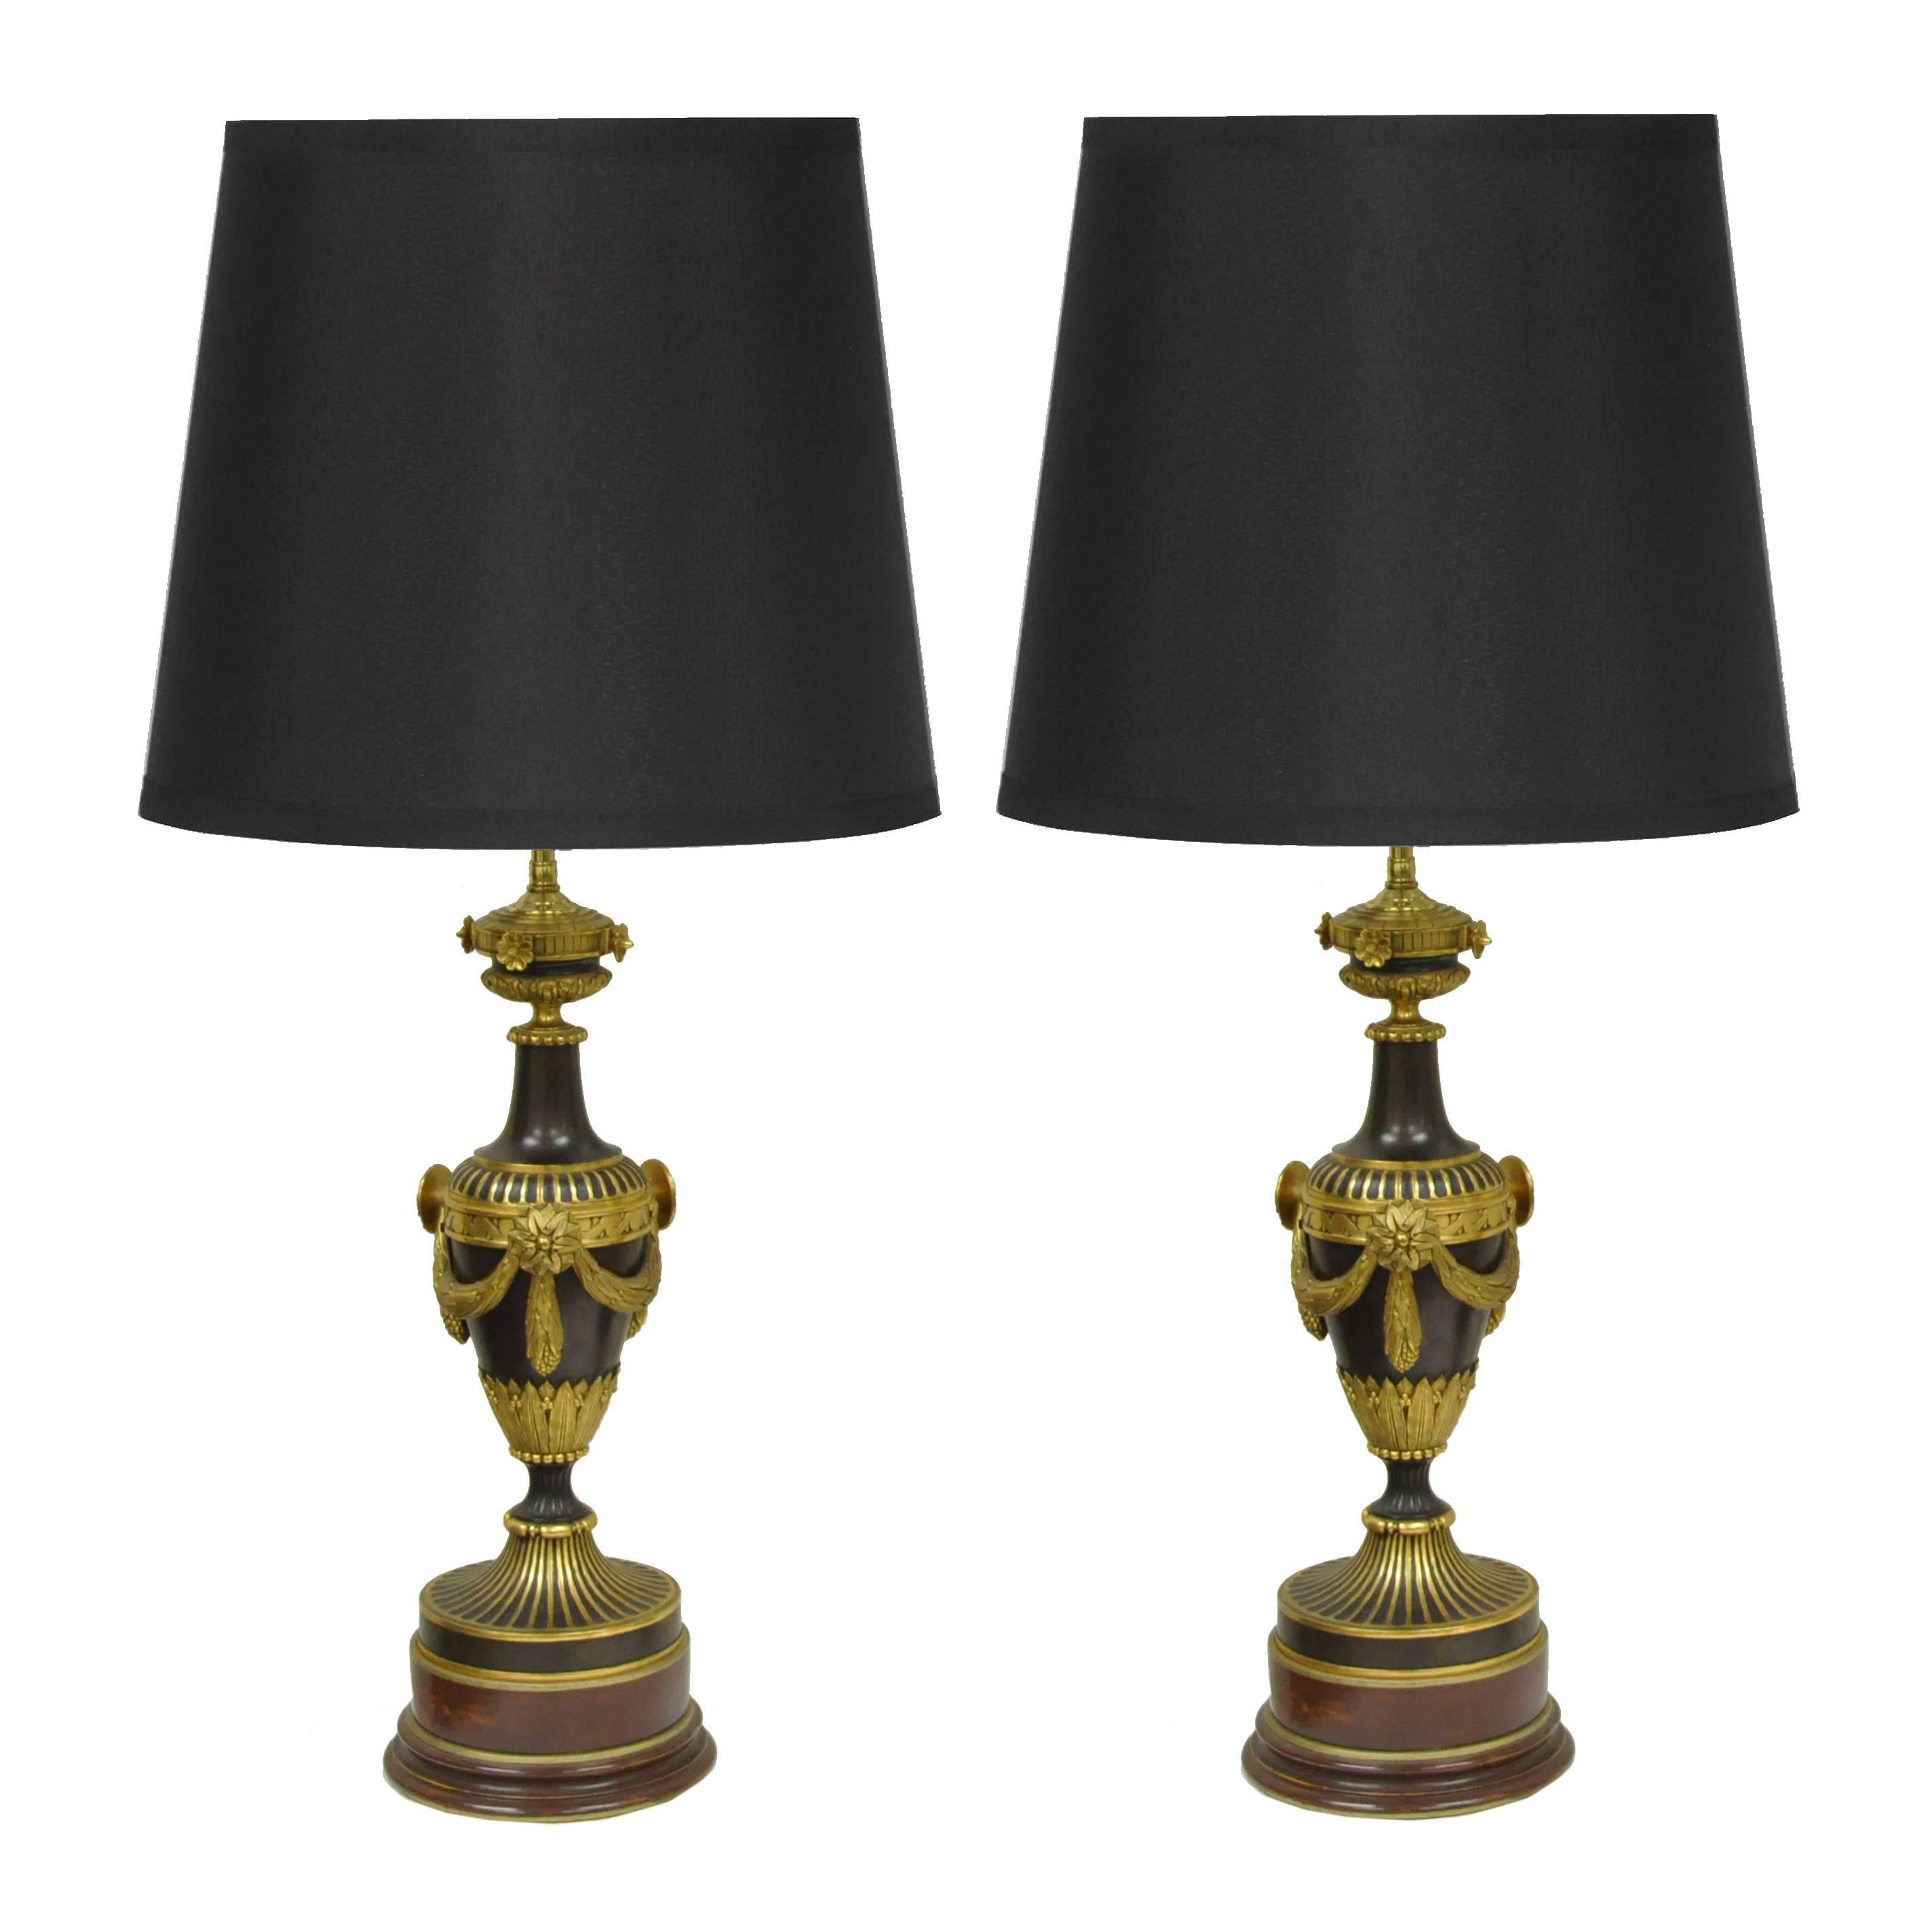 Pair of 19th Century Gilt Bronze French Neoclassical Empire Urn Form Table Lamps For Sale